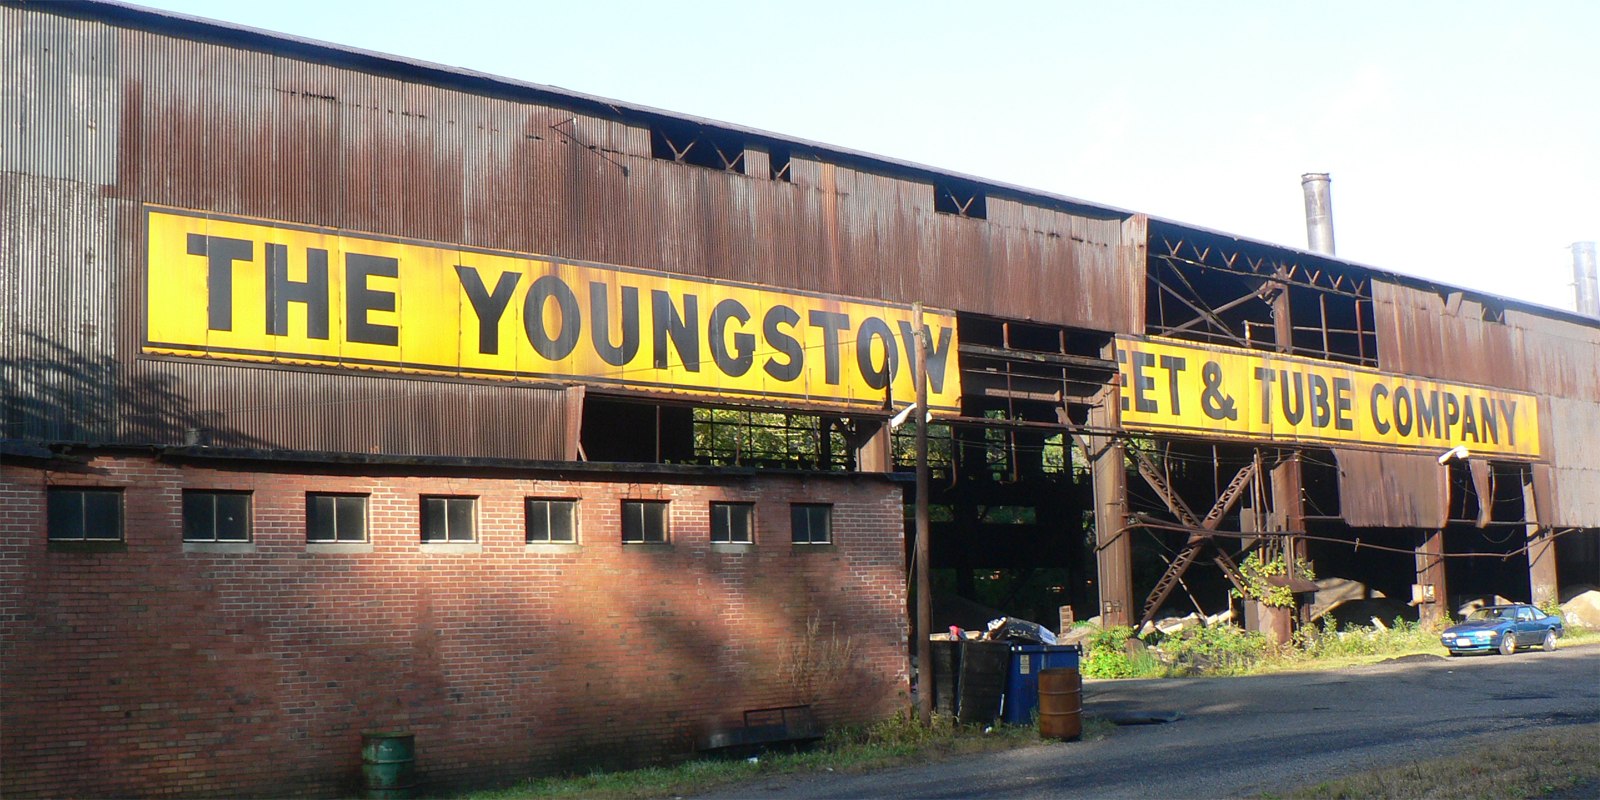 Abandoned Youngstown factory, via Flickr user stu_spivack.